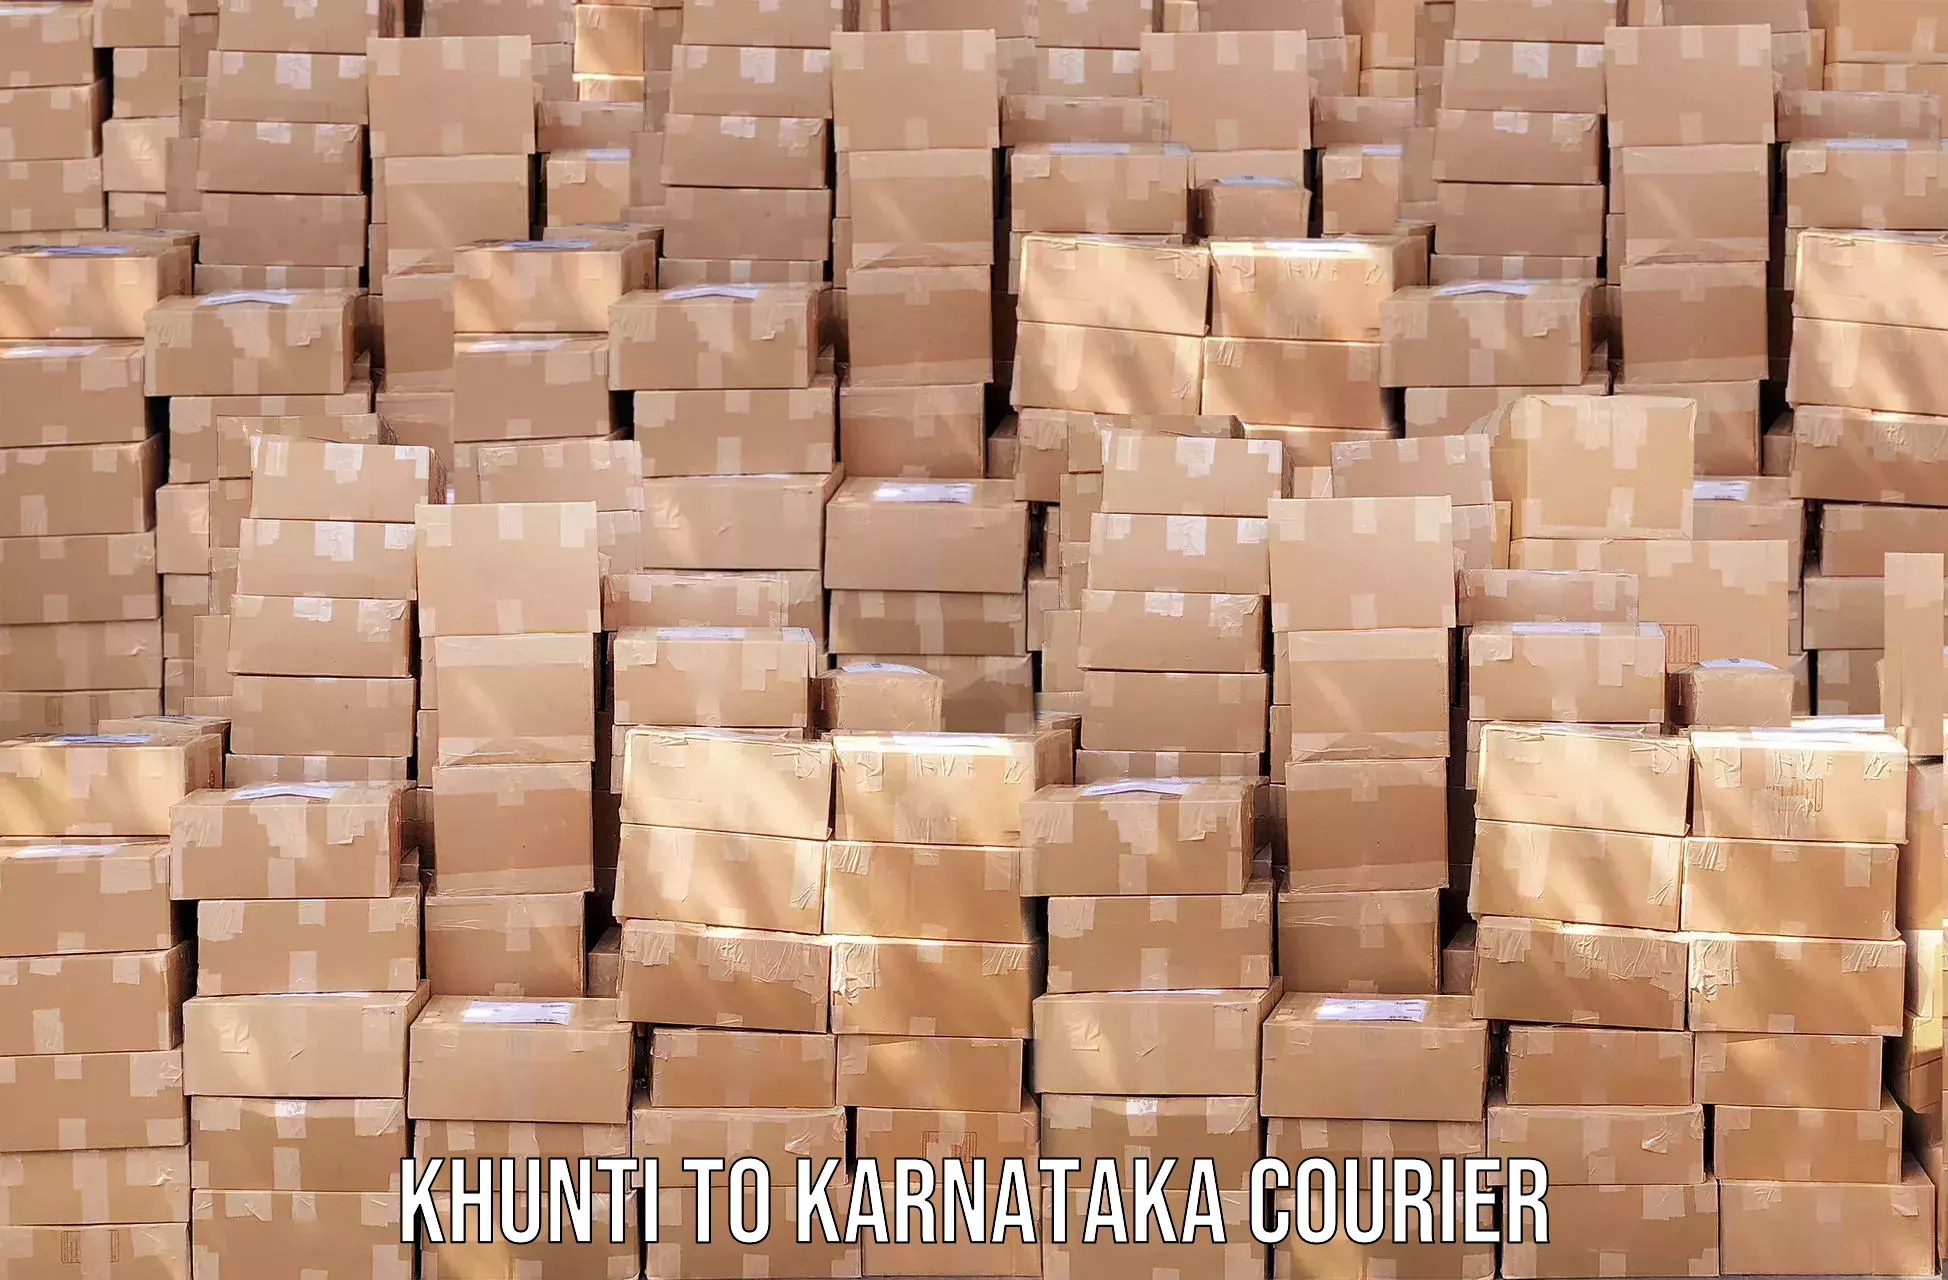 Package delivery network Khunti to Nelamangala